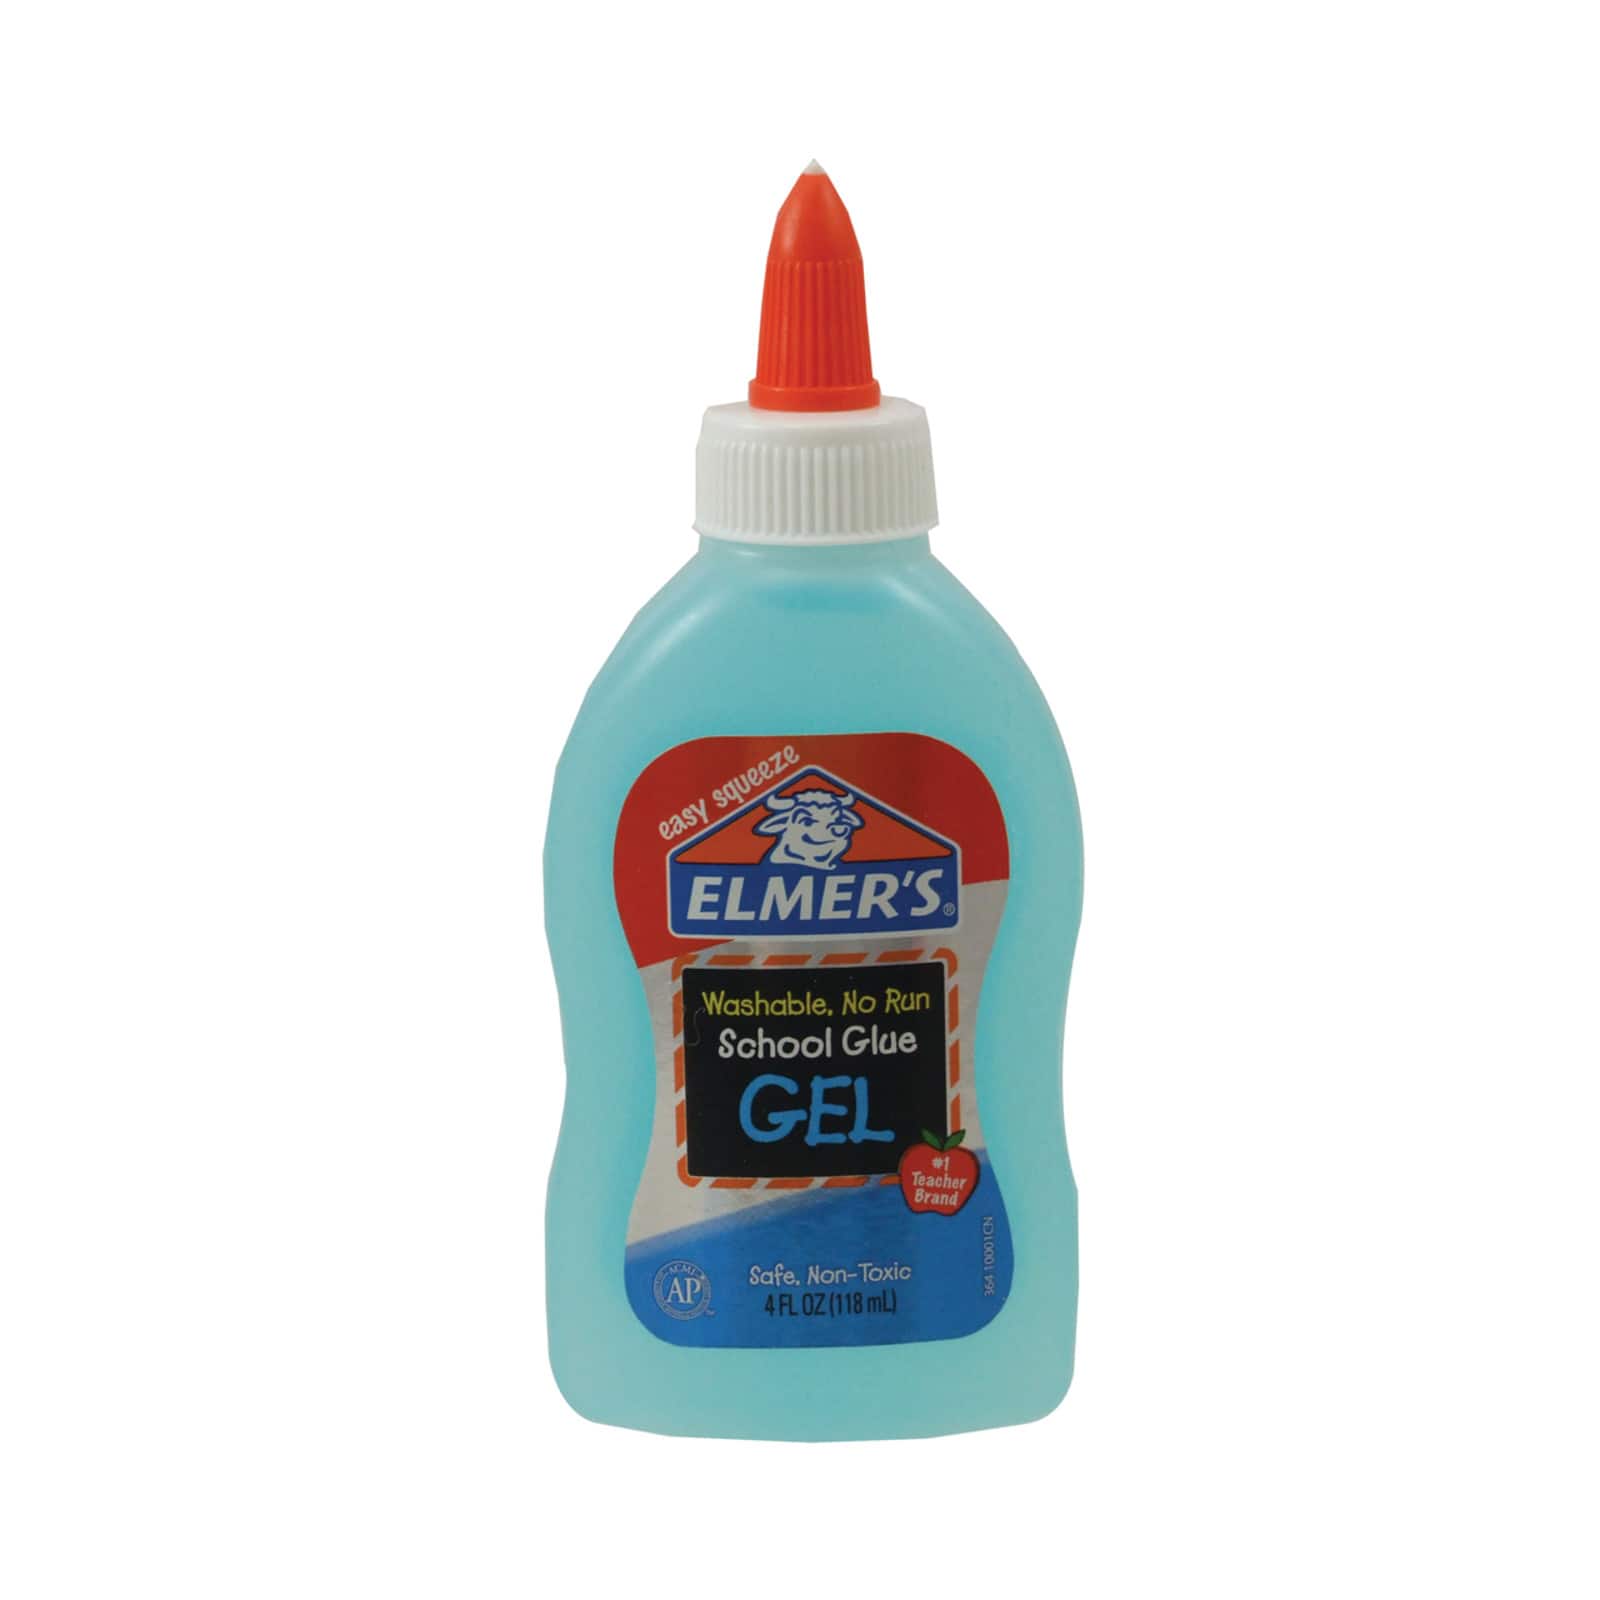 Elmer's Washable School Glue, Non-Toxic - 4 fl oz (Pack of 3), 3 pack -  Foods Co.